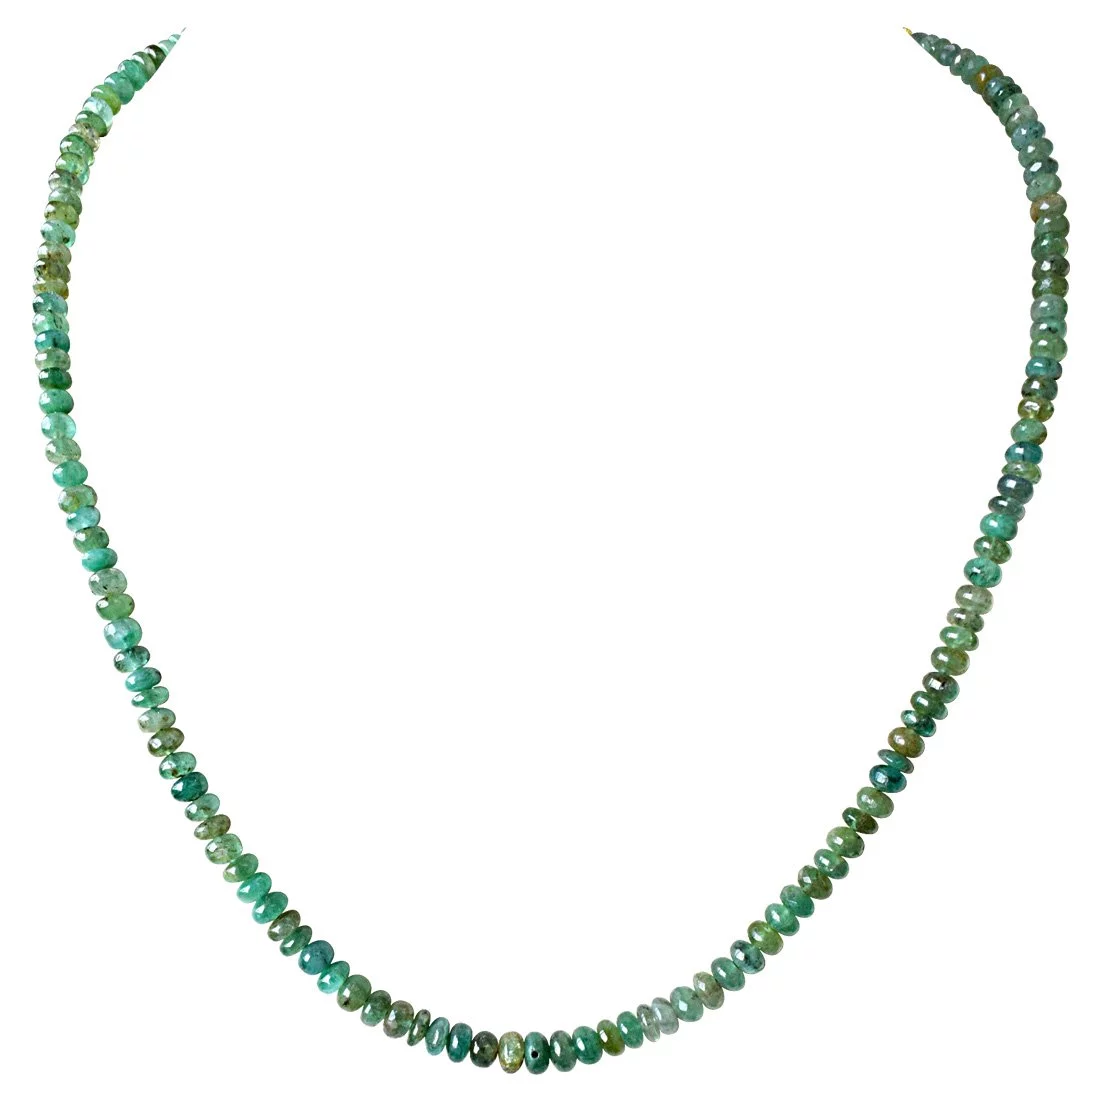 Single Line 92cts Real Natural Green Emerald Beads Necklace for Women (92cts EMR Neck)